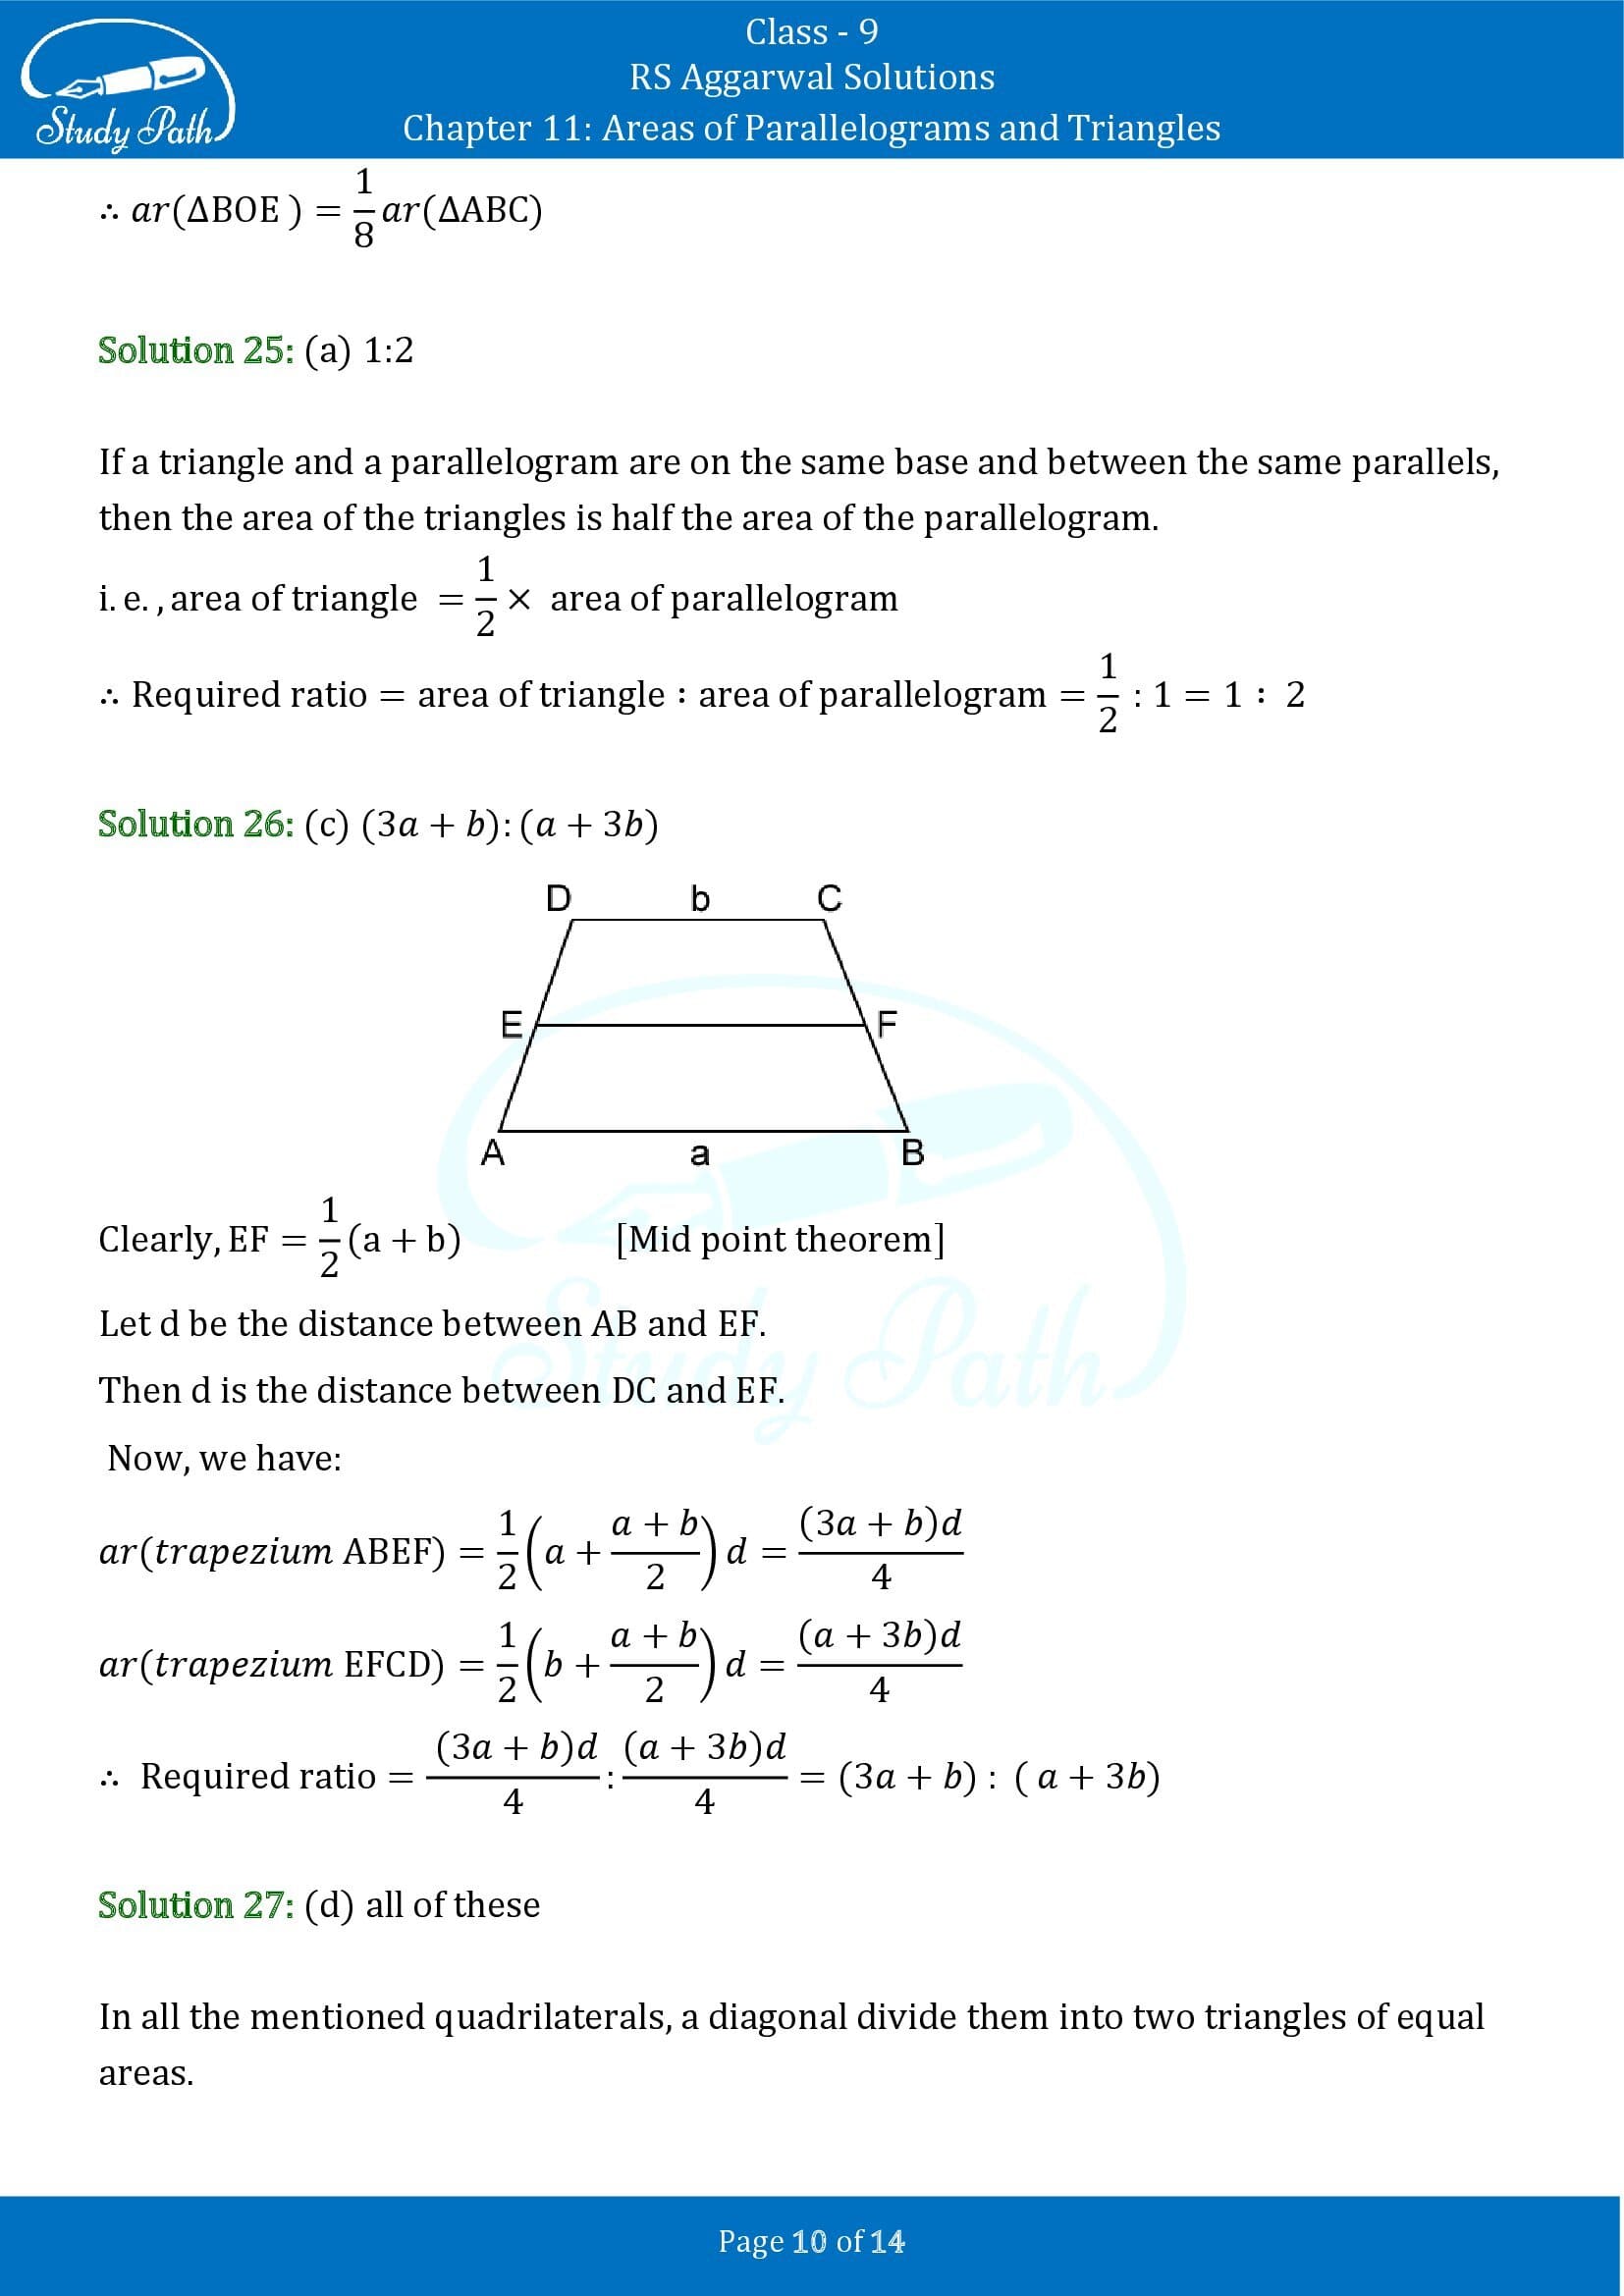 RS Aggarwal Solutions Class 9 Chapter 11 Areas of Parallelograms and Triangles Multiple Choice Questions MCQs 00010